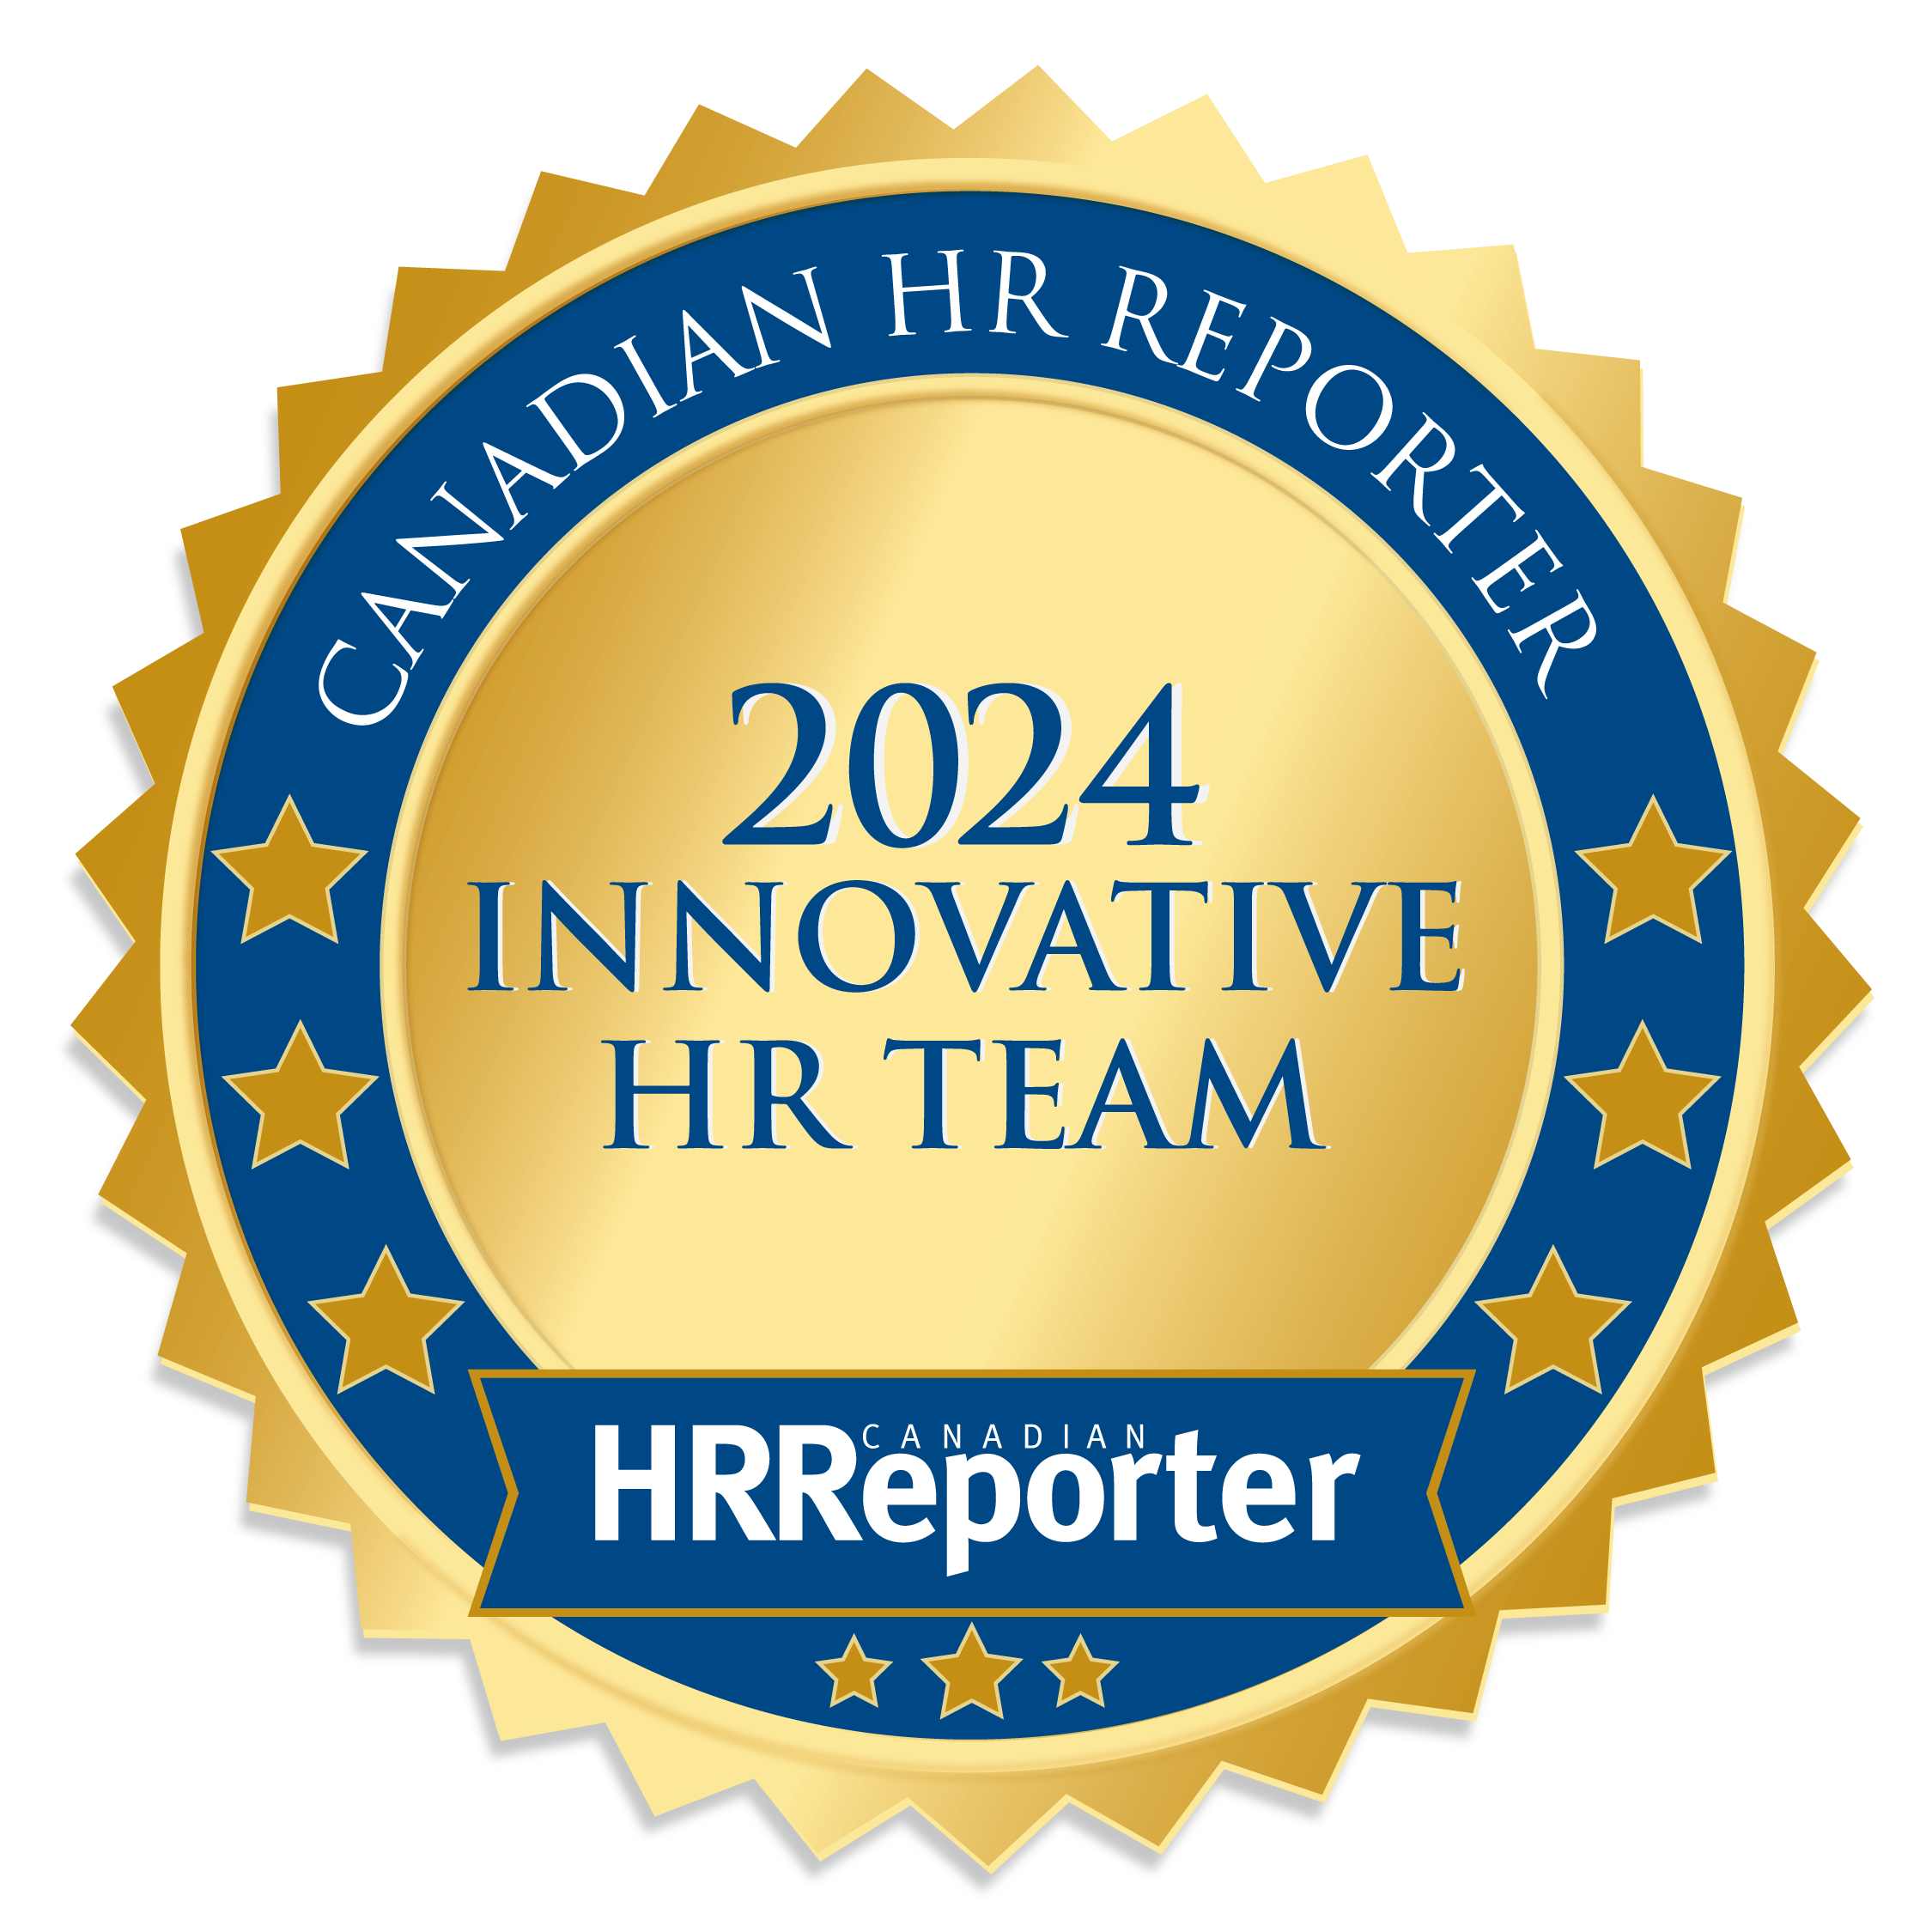 The Best HR Teams for Innovation in Canada